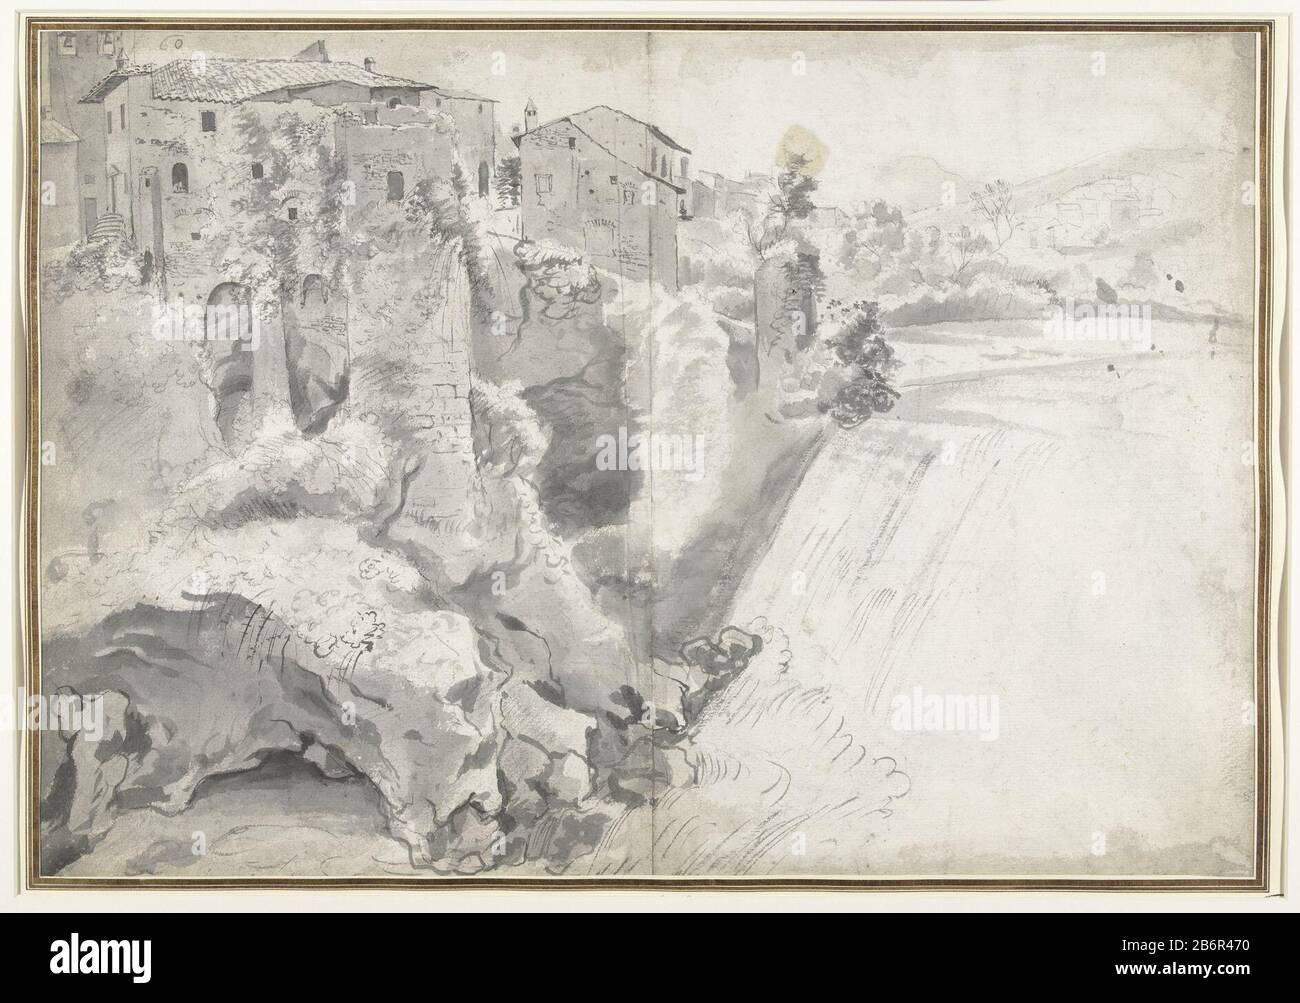 verhoging Overtreding Wereldvenster Gezicht op een grote waterval bij Tivoli View of a large waterfall near  Tivoli Object Type: Drawing Object number: RP-T-1967-81 (V) Description:  Possibly Tivoli depicted in Italy Manufacture Creator: artist: Jan Worst